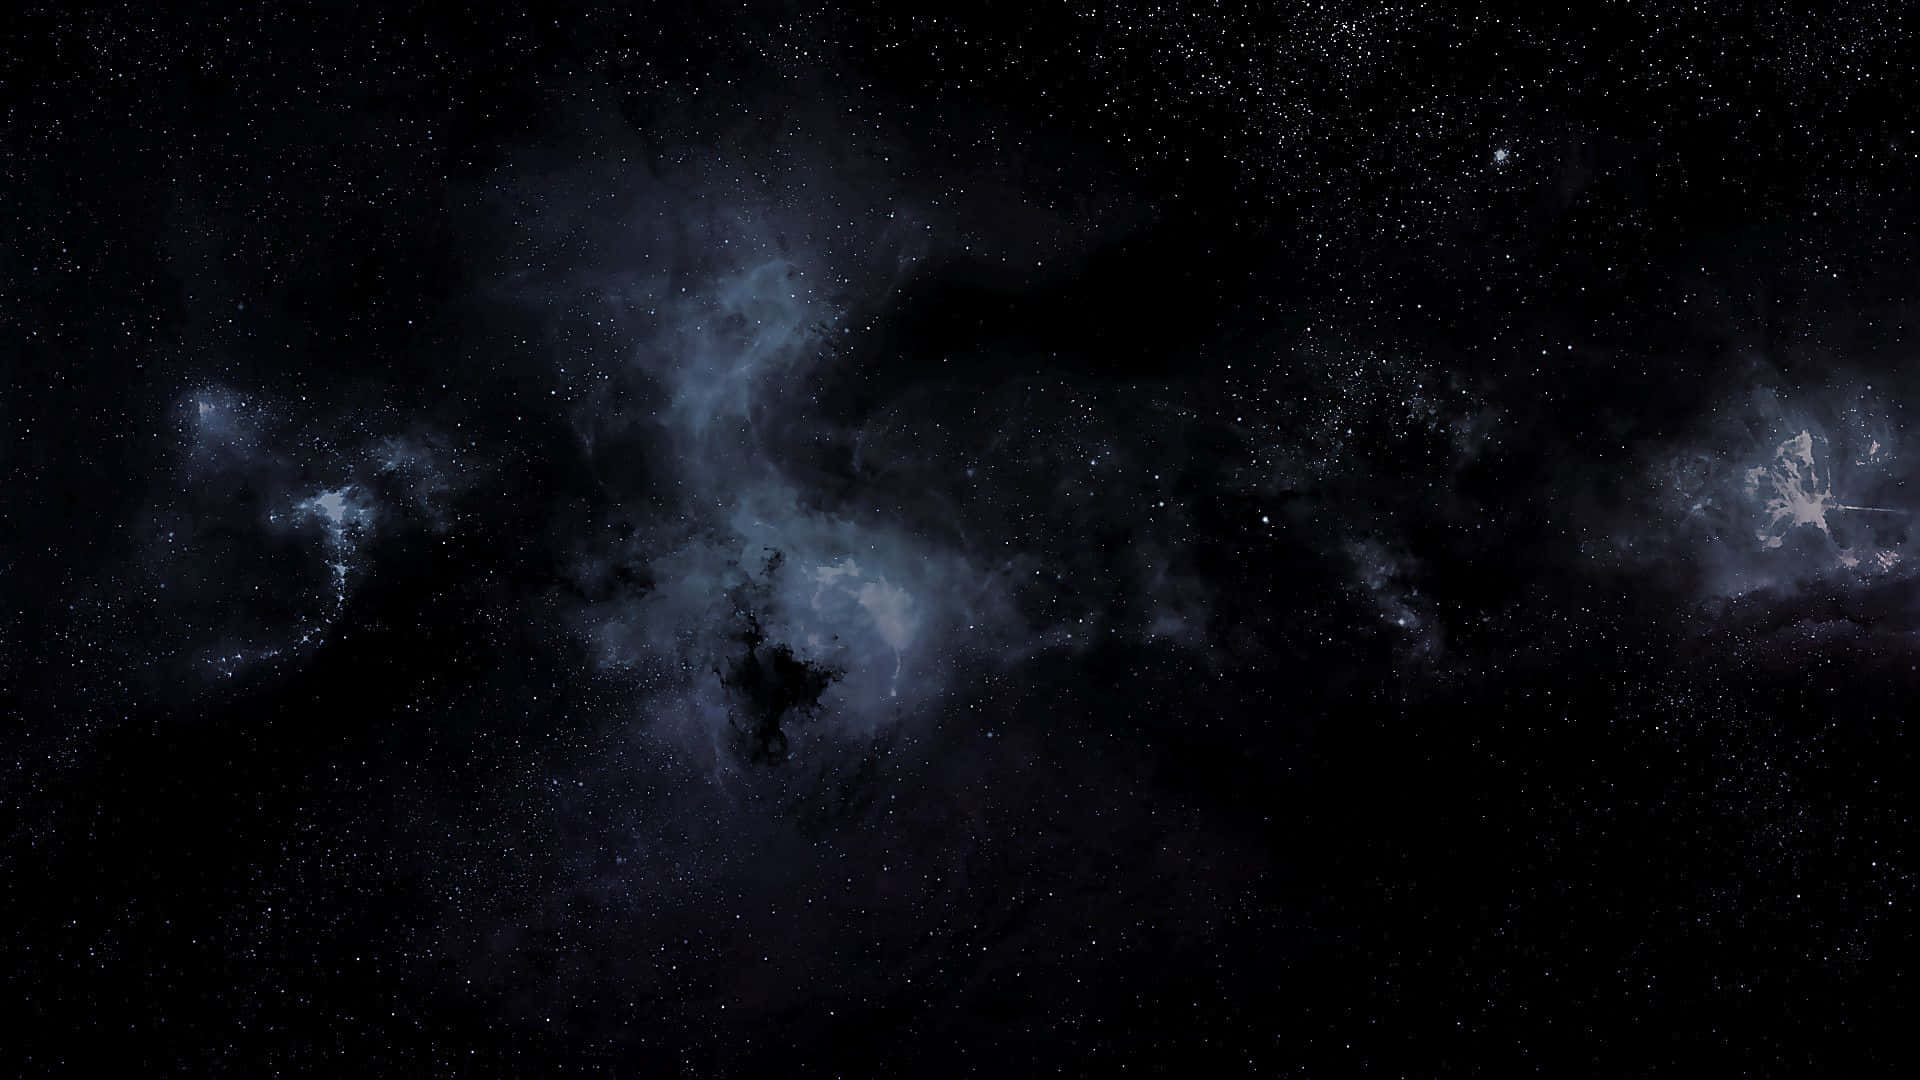 "Instantly immerse yourself in the pure blackness of OLED technology" Wallpaper